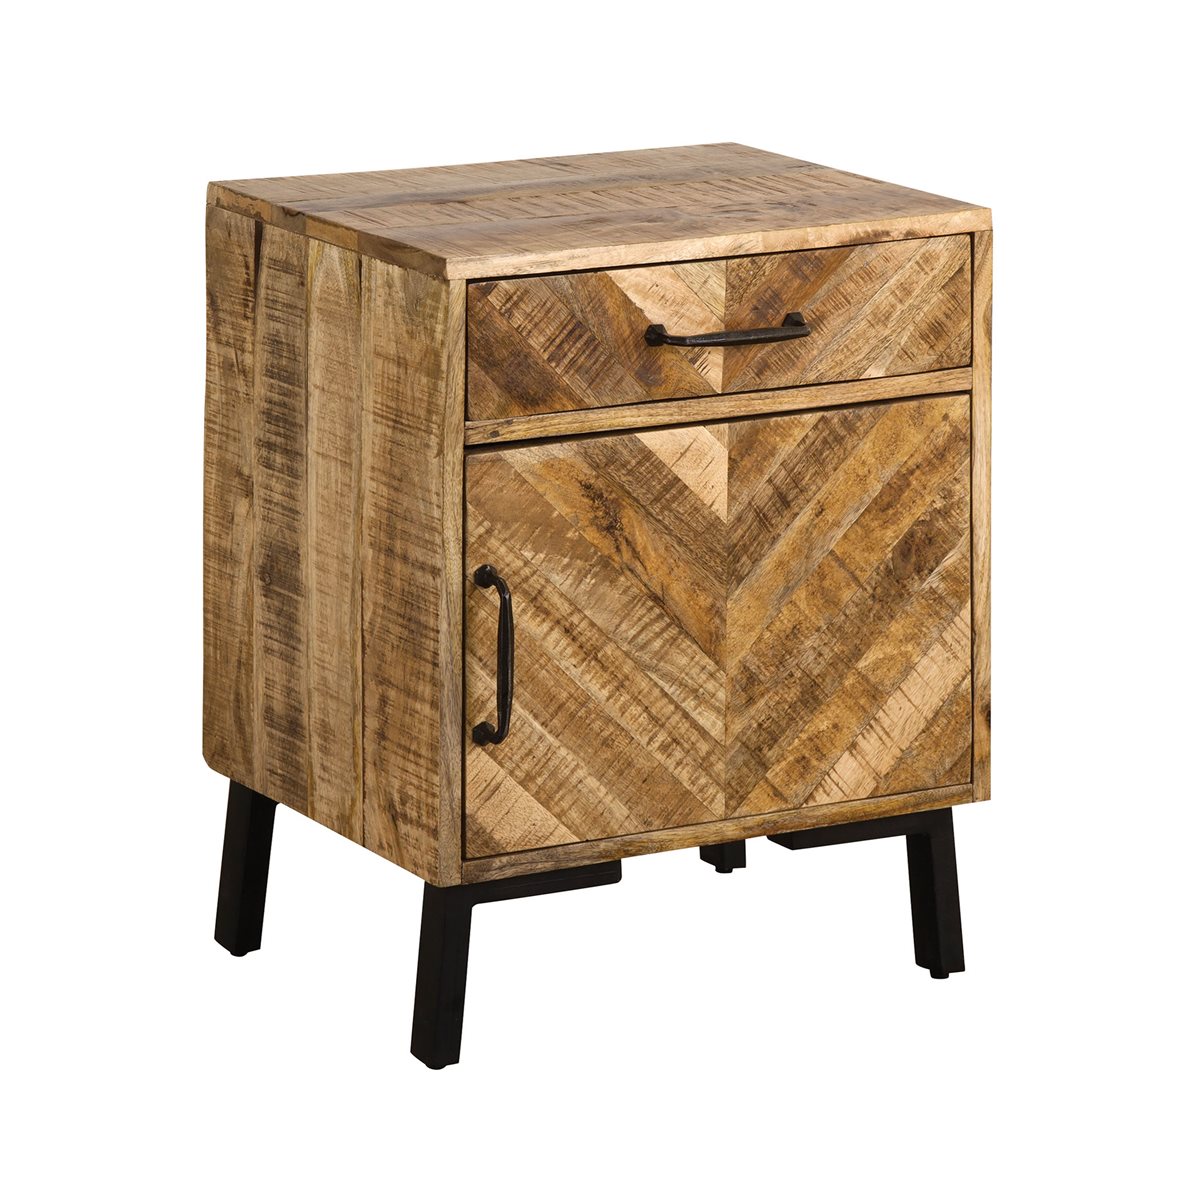 Stein World Livina Accent Table 17286